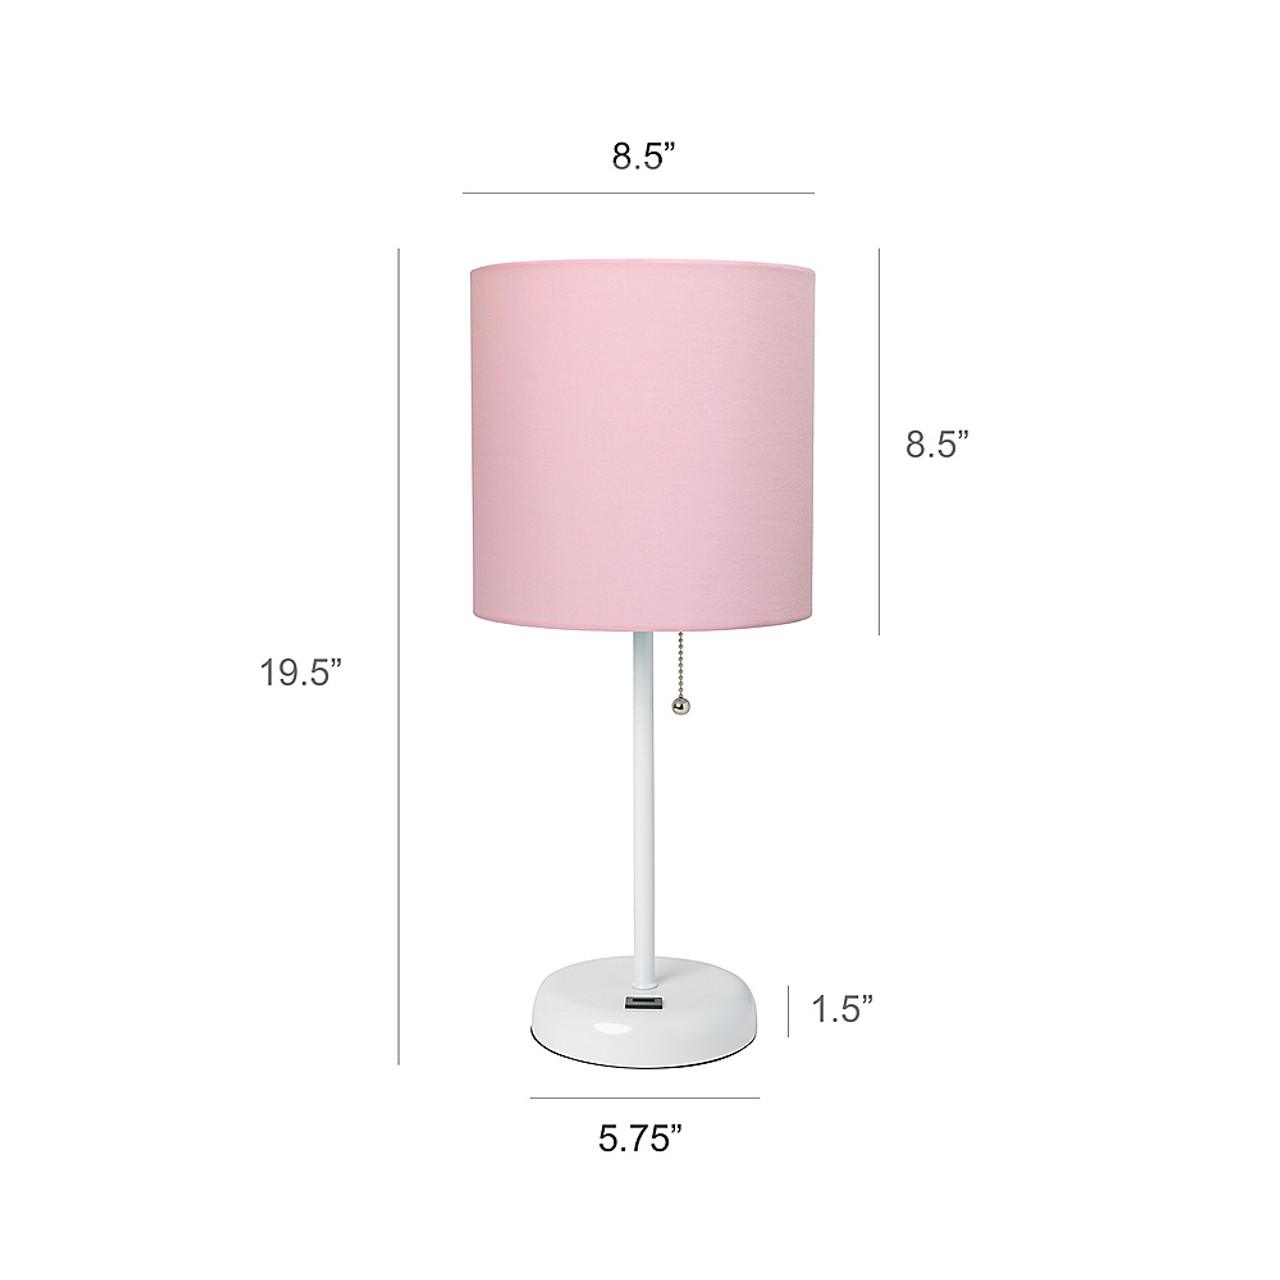 LimeLights White Stick Lamp with USB charging port and Fabric Shade 2 Pack Set, Light Pink